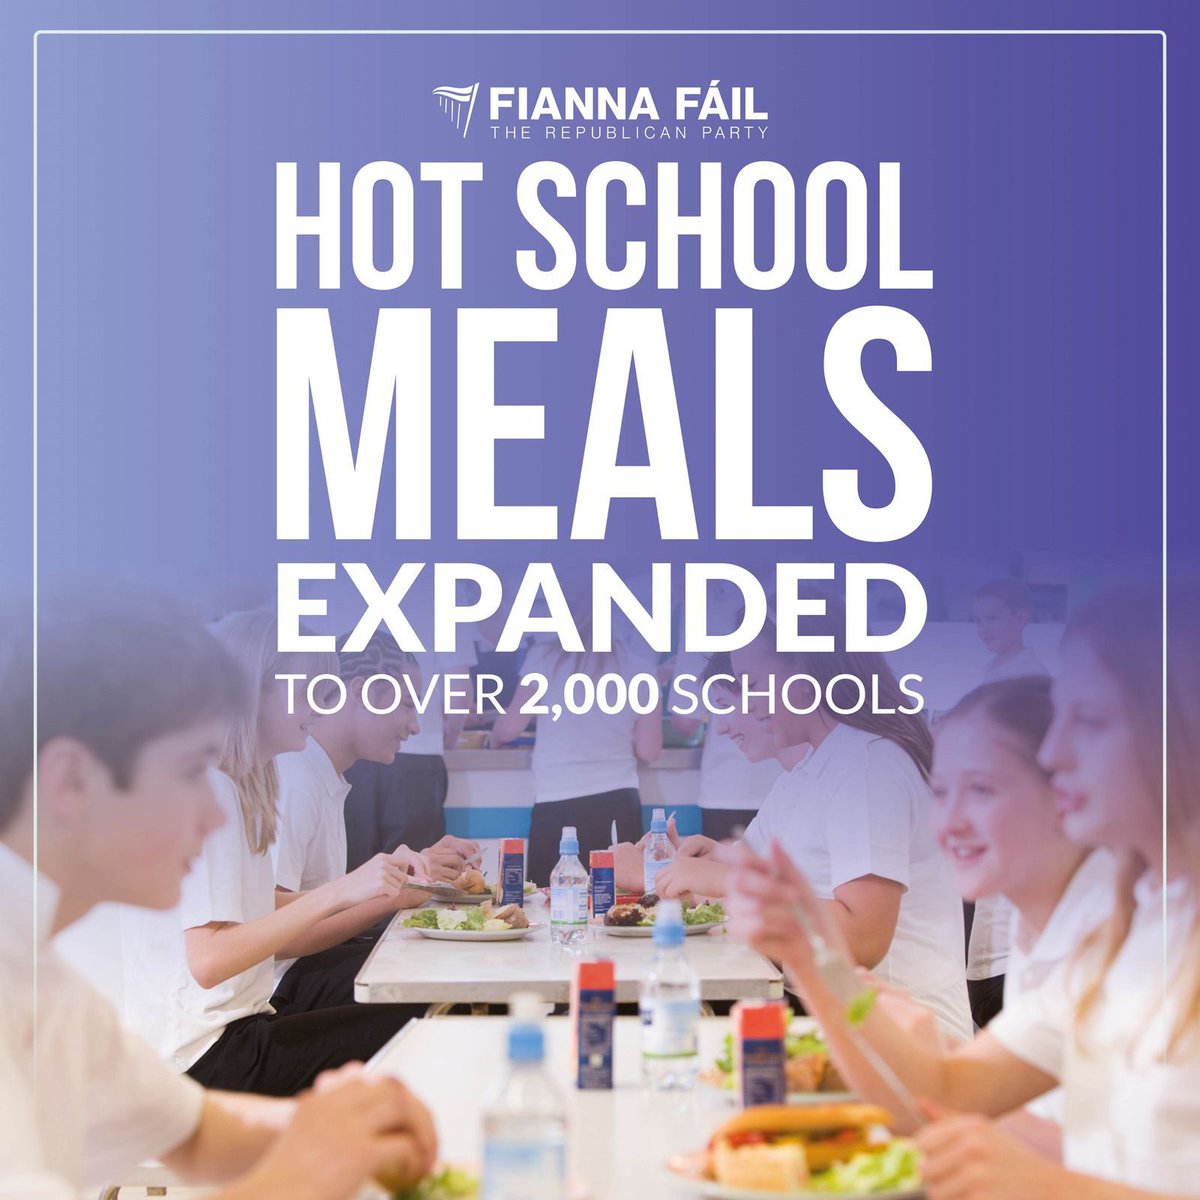 ✅ 900 additional primary schools offering hot school meals from April 2024 ✅ 150,000 children will benefit from expansion ✅ Hot School Meals Programme grows from 30 schools to over 2,000 schools ✅ Remaining schools can now apply to receive Hot School Meals from September